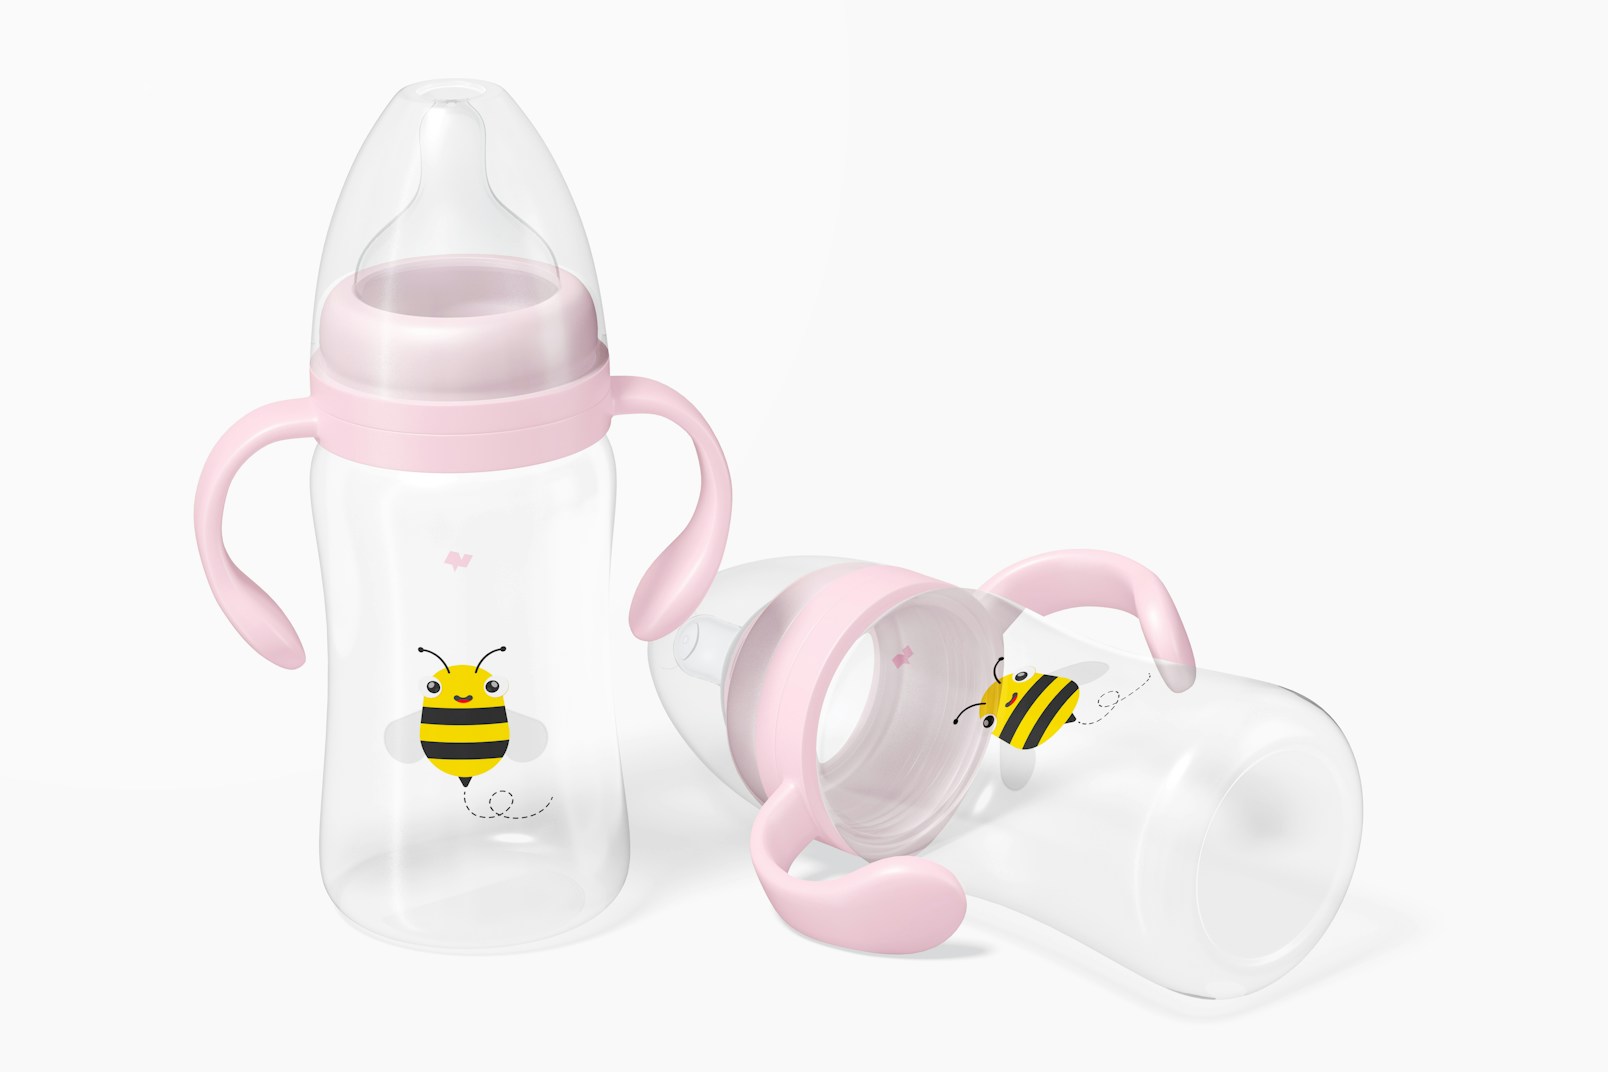 300ml Baby Milk Bottles Blister Mockup, Standing and Dropped